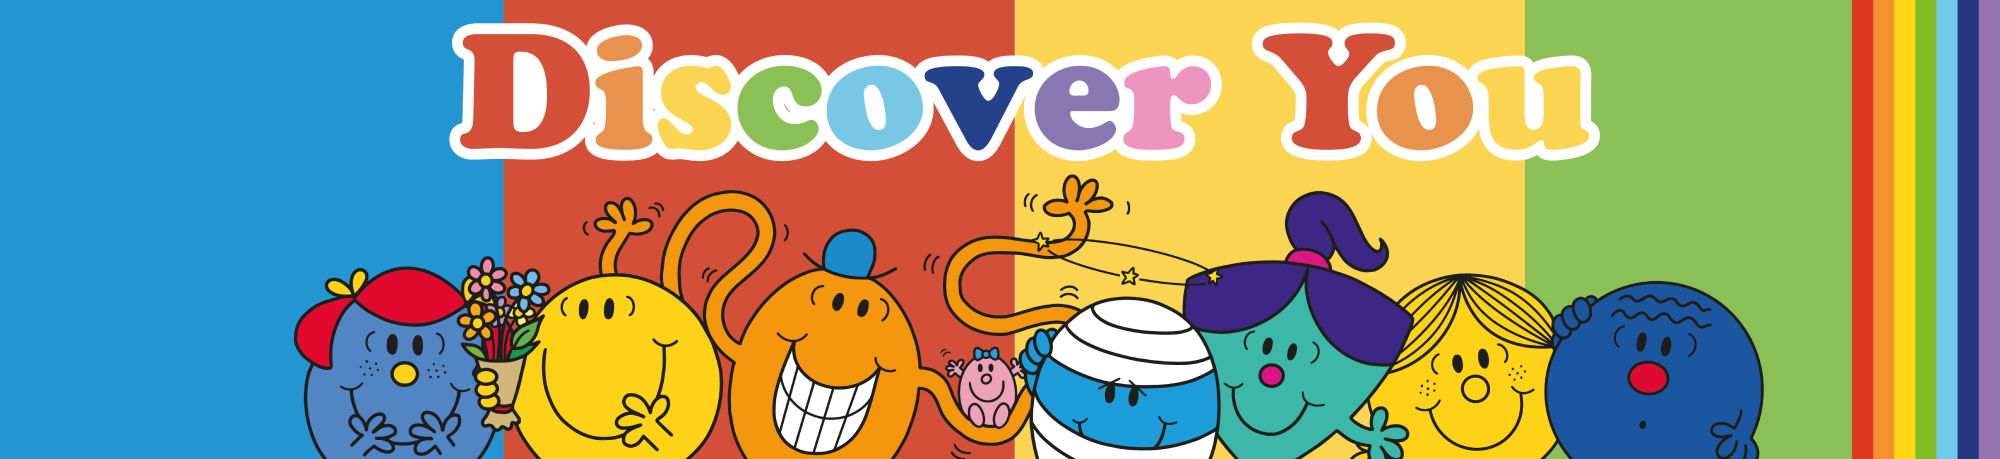 discover you banner